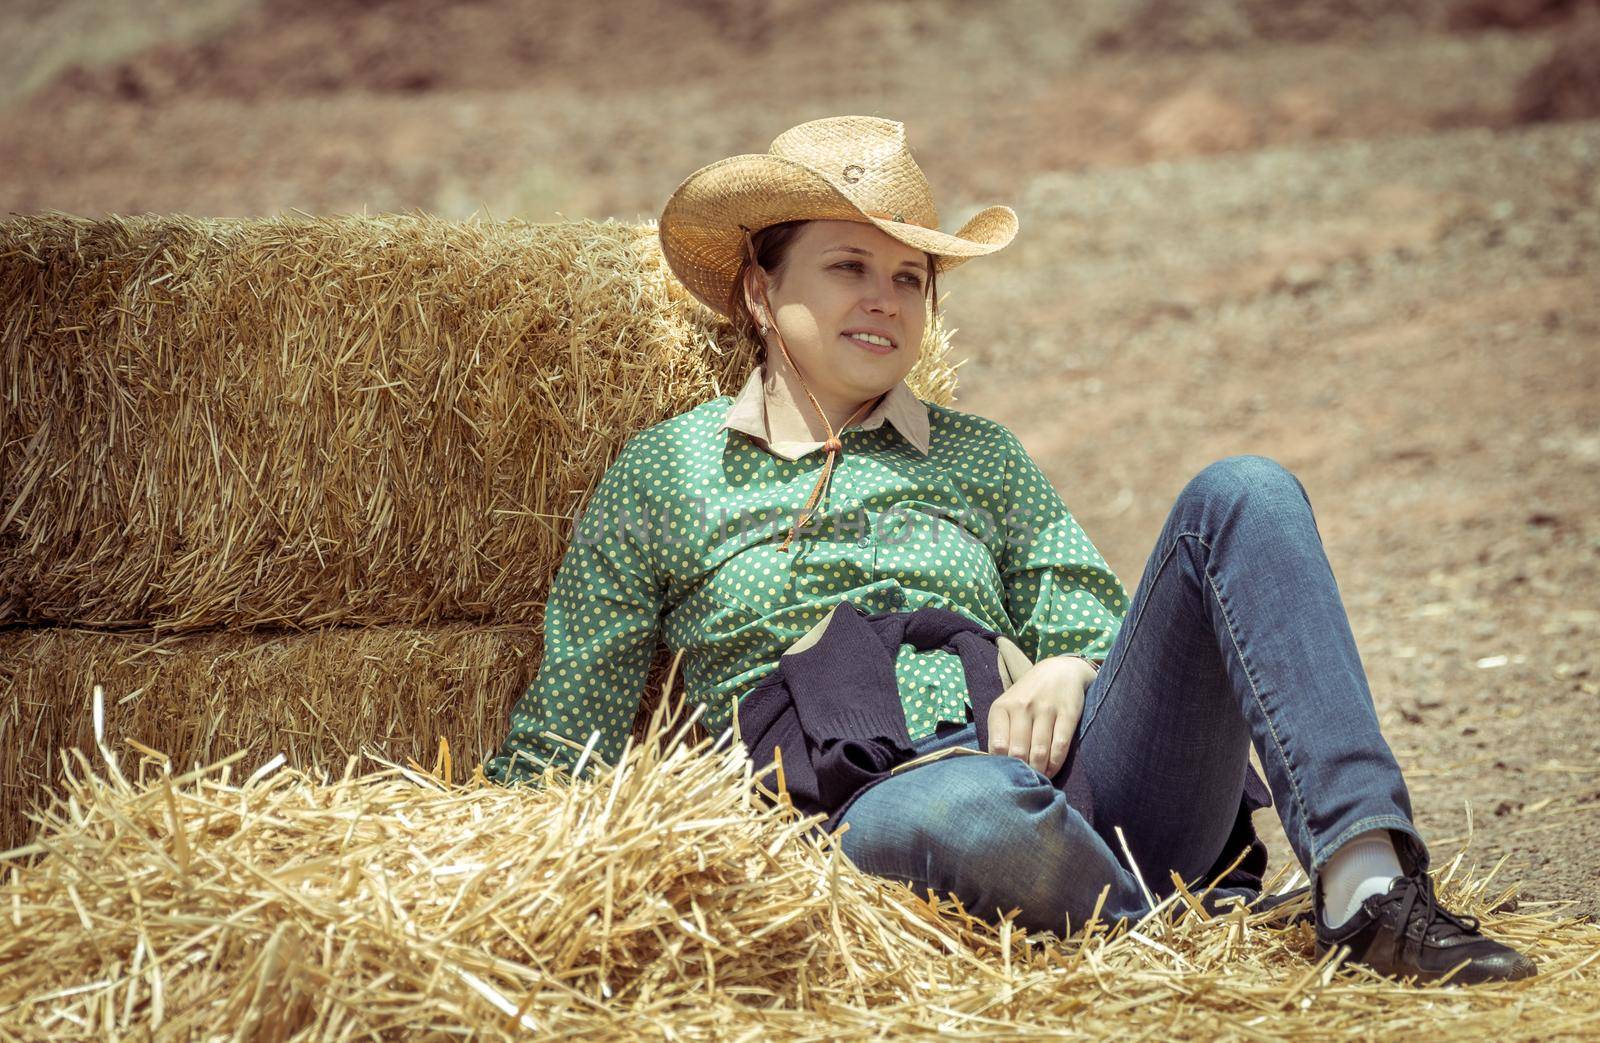 Cowgirl woman smiling happy sitting next to haystack wearing cowboy hat. Beautiful young Caucasian girl in countryside